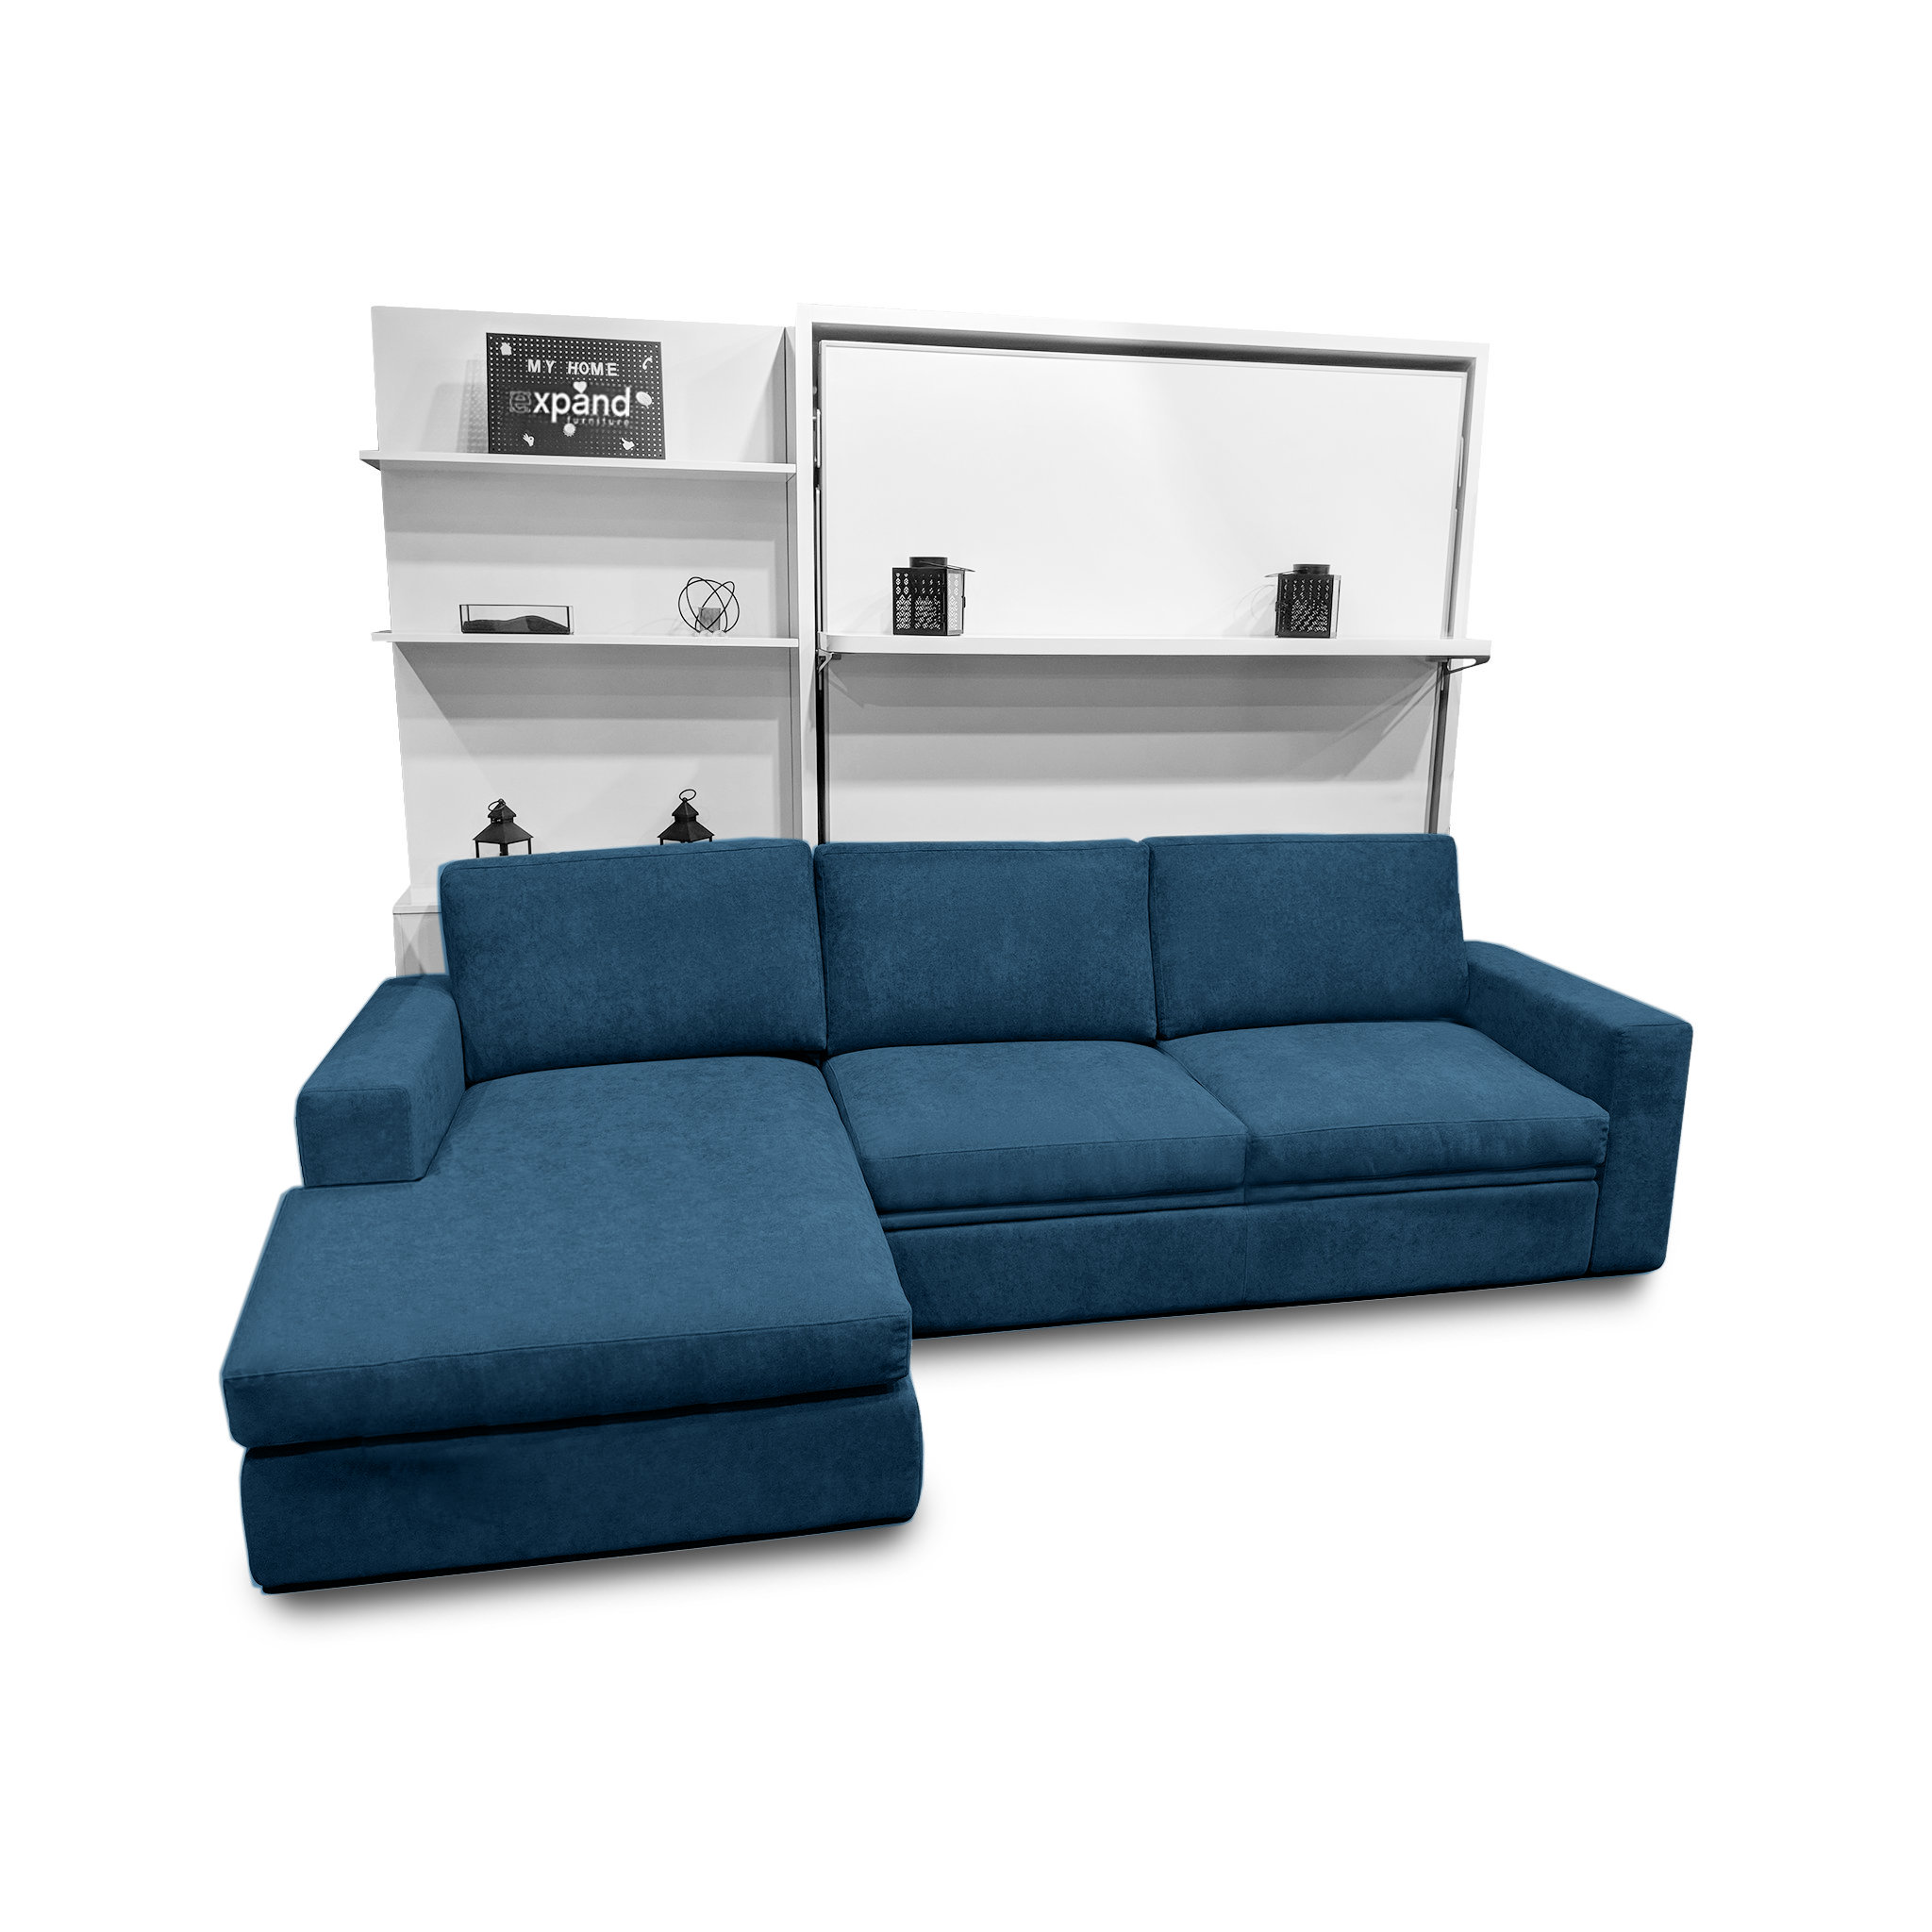 Net zo Uitstralen gebrek Compatto - Shelf Wall Bed over Sectional Sofa - Expand Furniture - Folding  Tables, Smarter Wall Beds, Space Savers